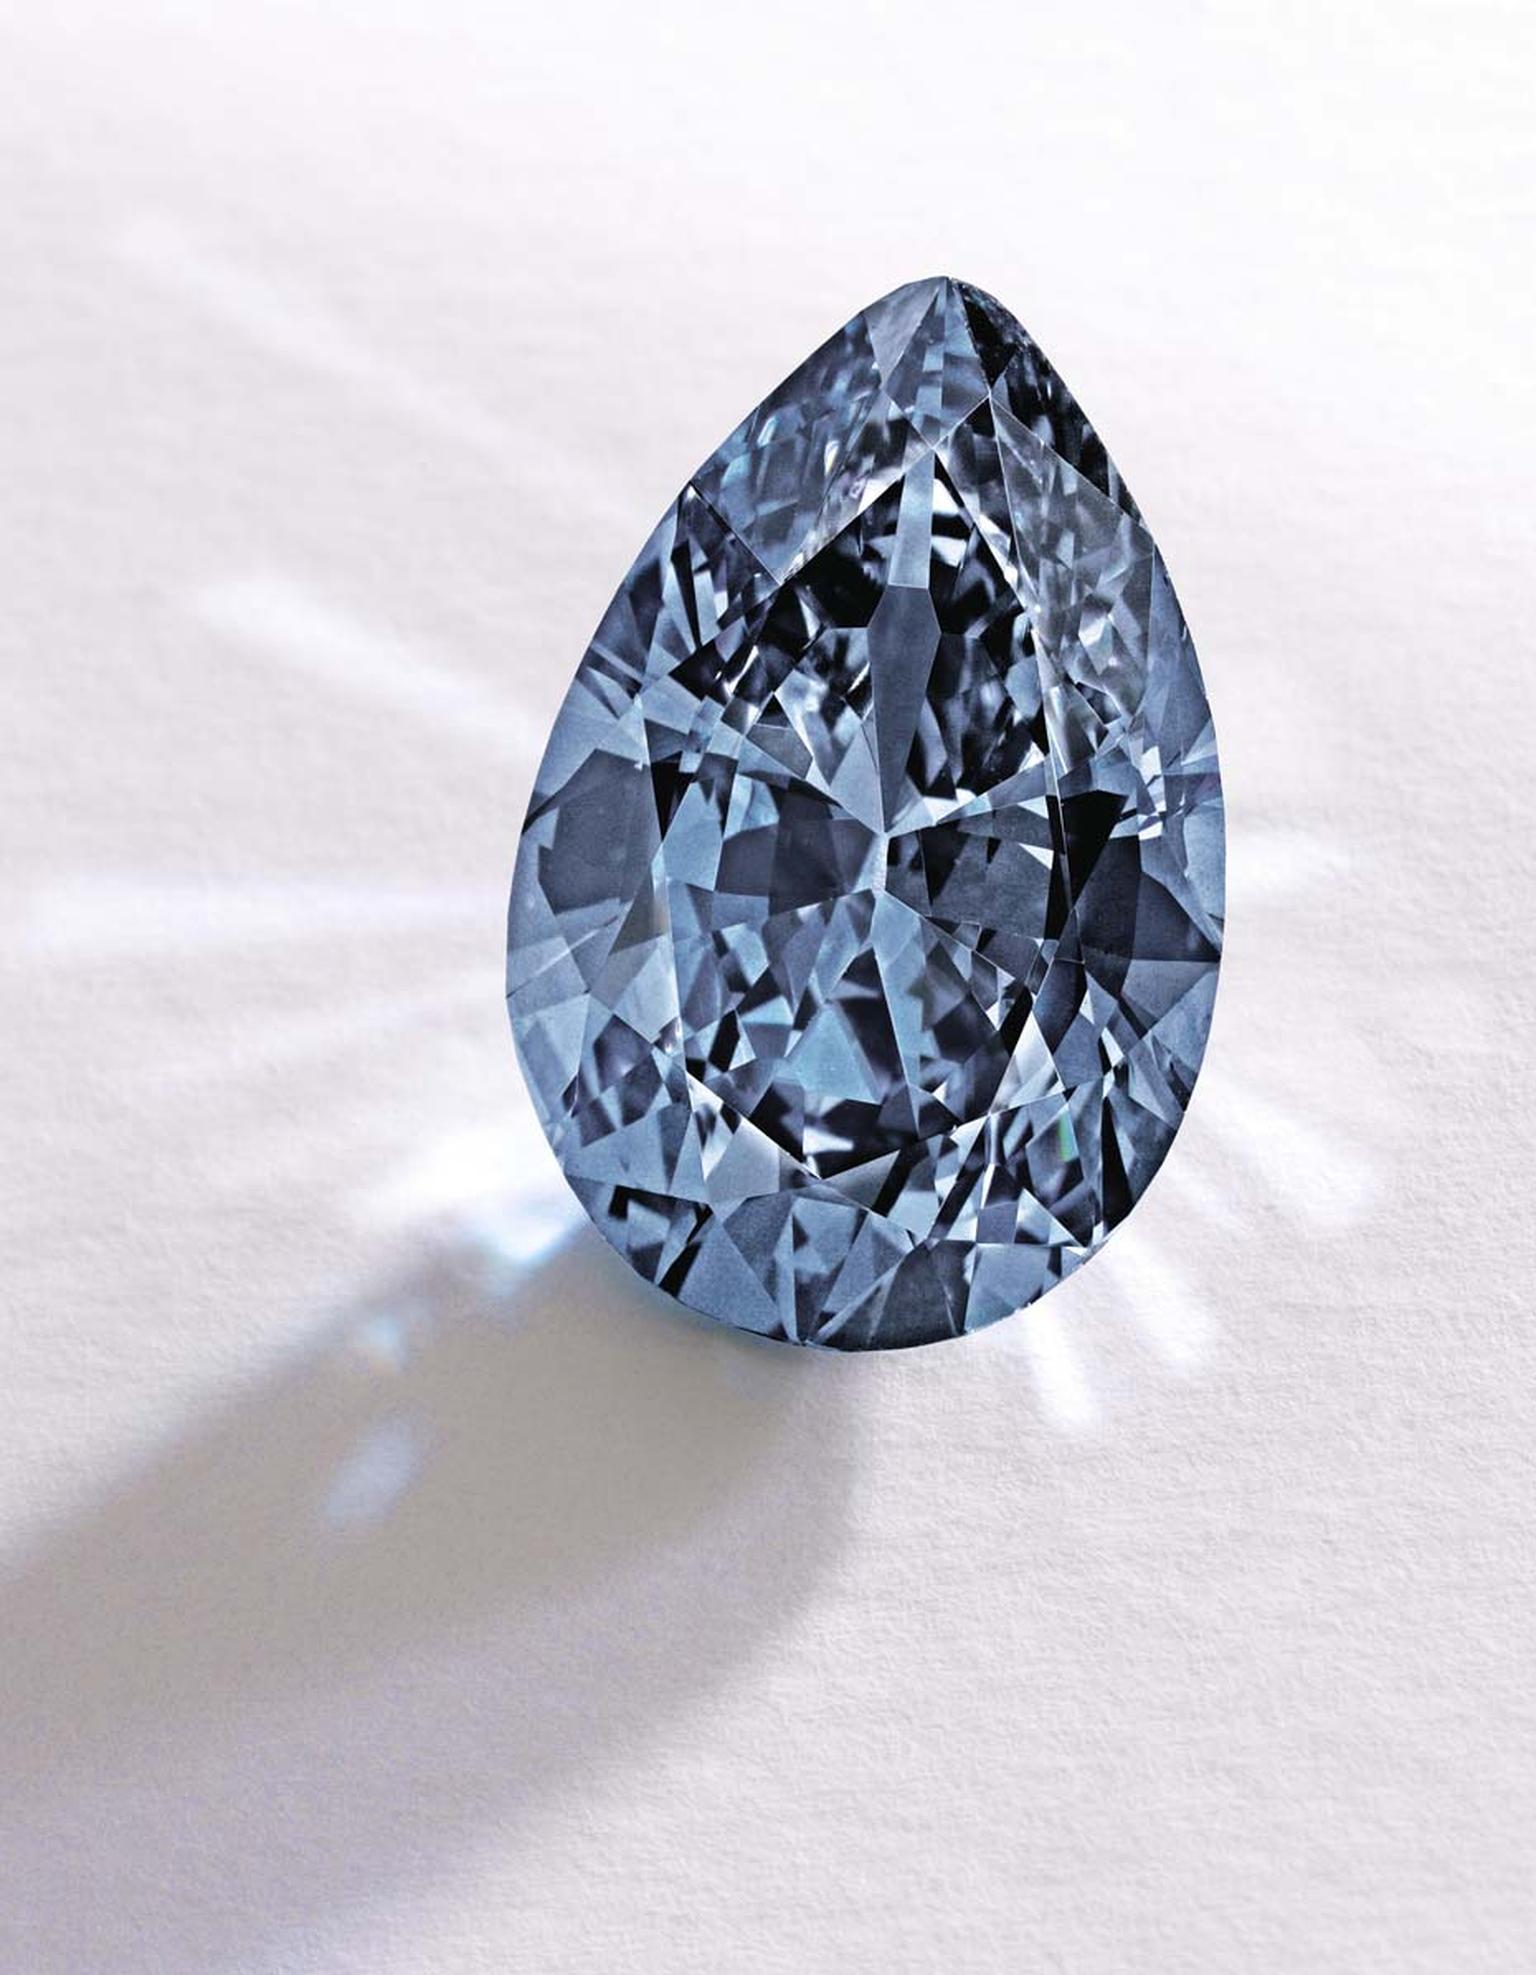 A rare 9.74ct Fancy Vivid Blue diamond, part of Sotheby’s sale of Jewels & Objects of Vertu from the collection of Mrs Paul Mellon, broke two world records when it was sold for $32.6 million yesterday.